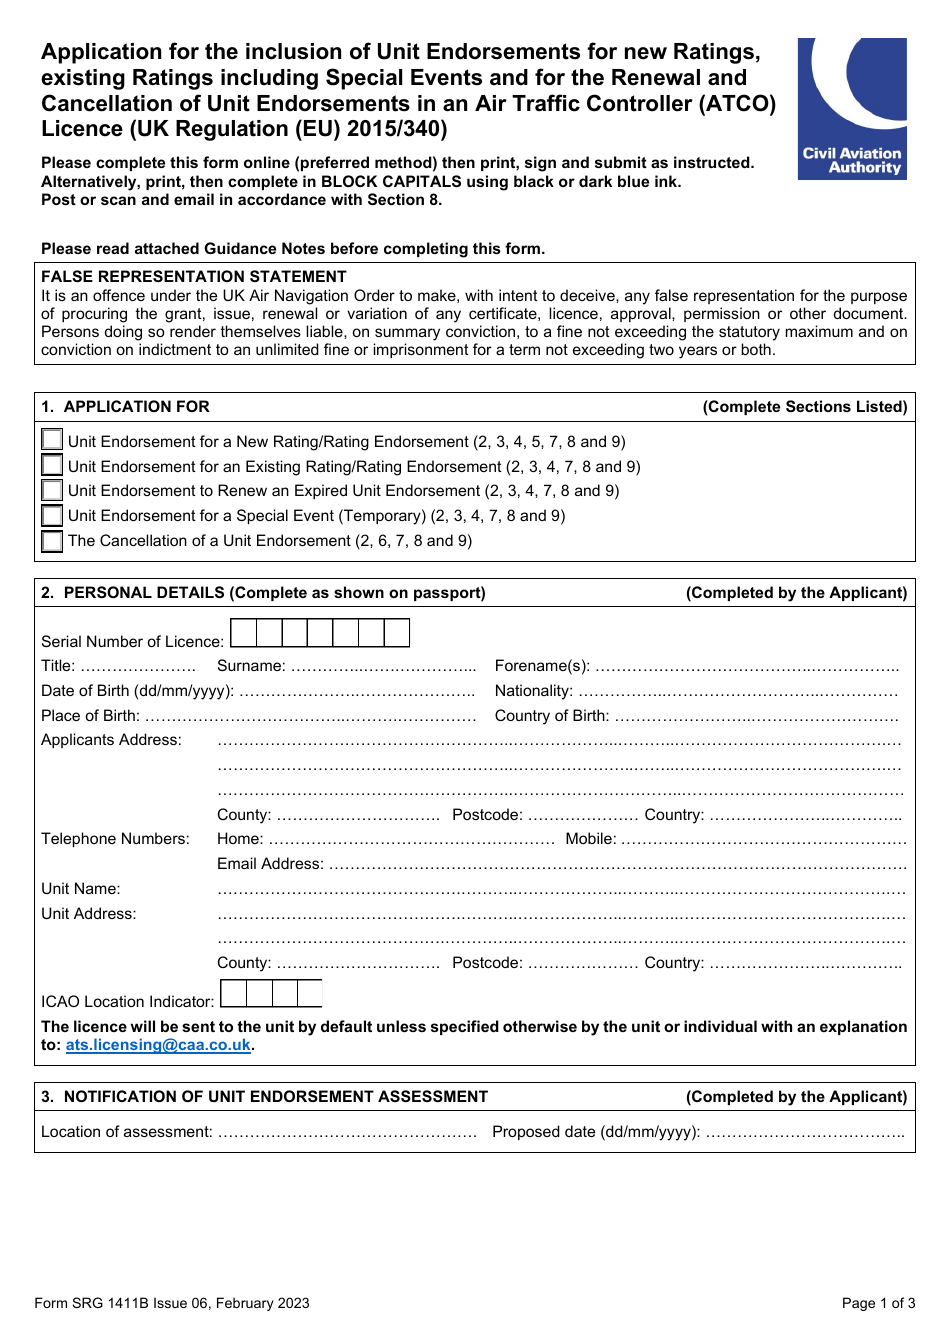 Form SRG1411B Application for the Inclusion of Unit Endorsements for New Ratings, Existing Ratings Including Special Events and for the Renewal and Cancellation of Unit Endorsements in an Air Traffic Controller (Atco) Licence (UK Regulation (Eu) 2015 / 340) - United Kingdom, Page 1